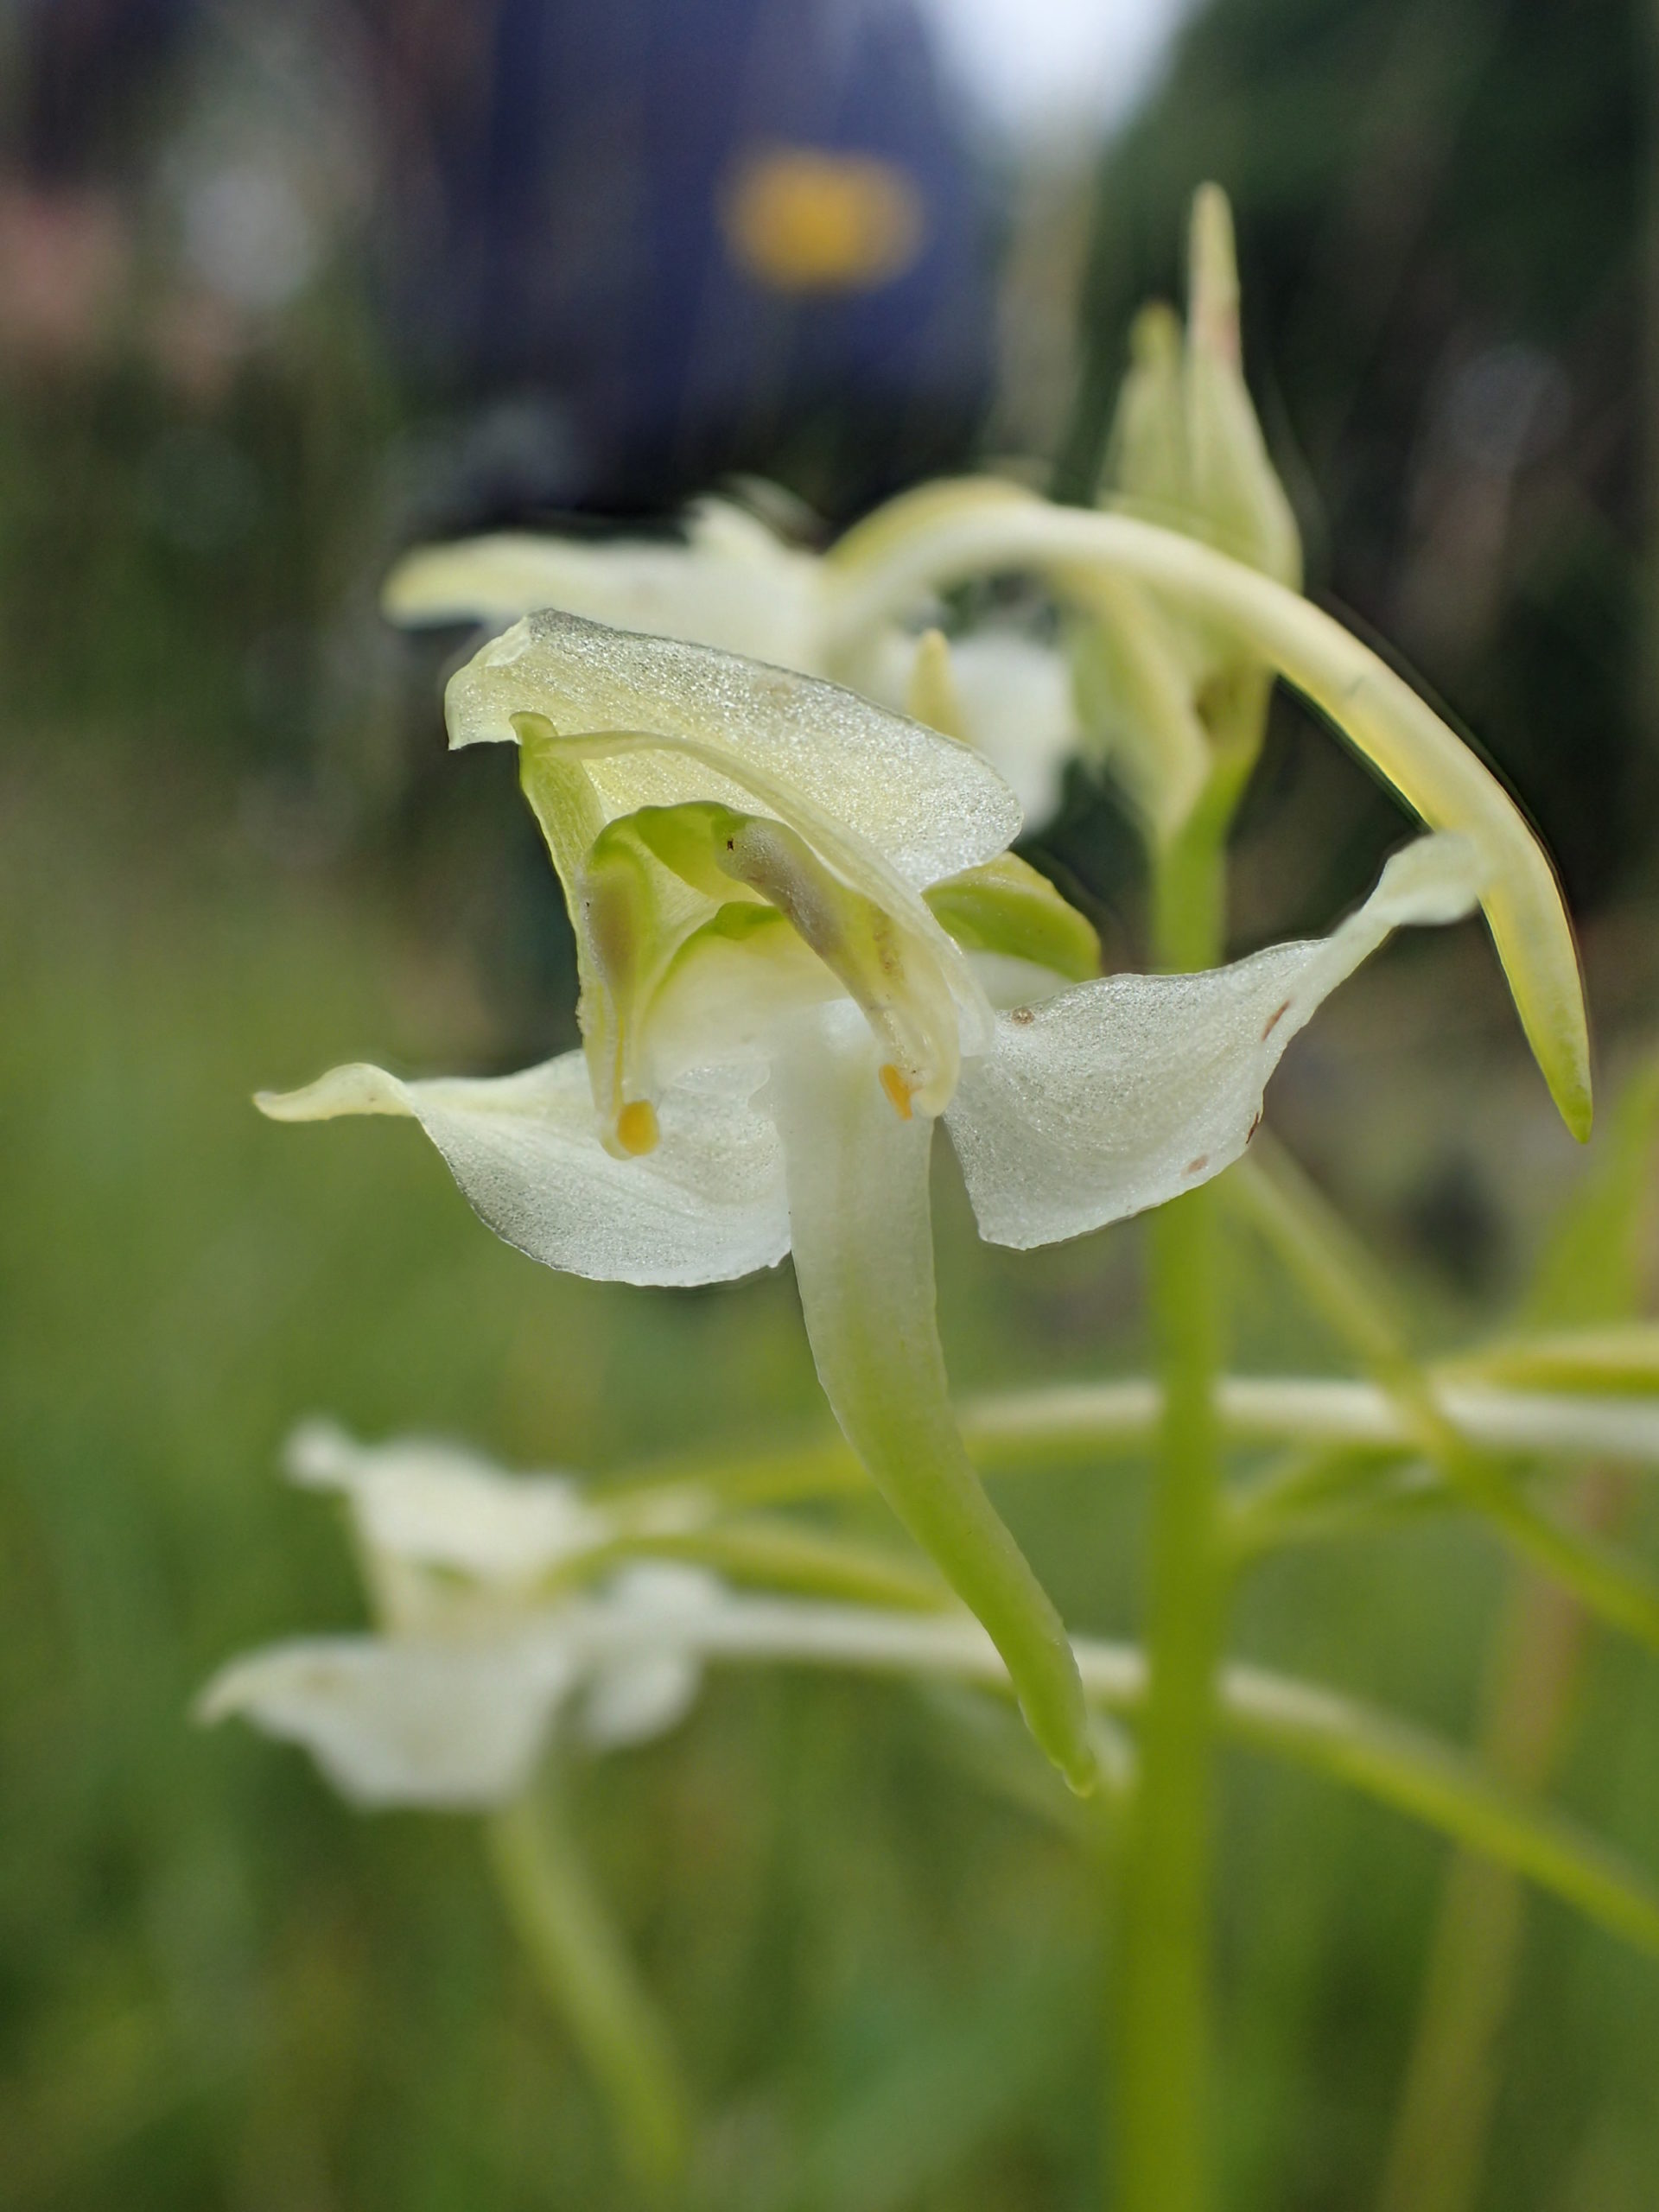 Greater Butterfly-orchid (Platanthera chlorantha) by Hazel Metherell